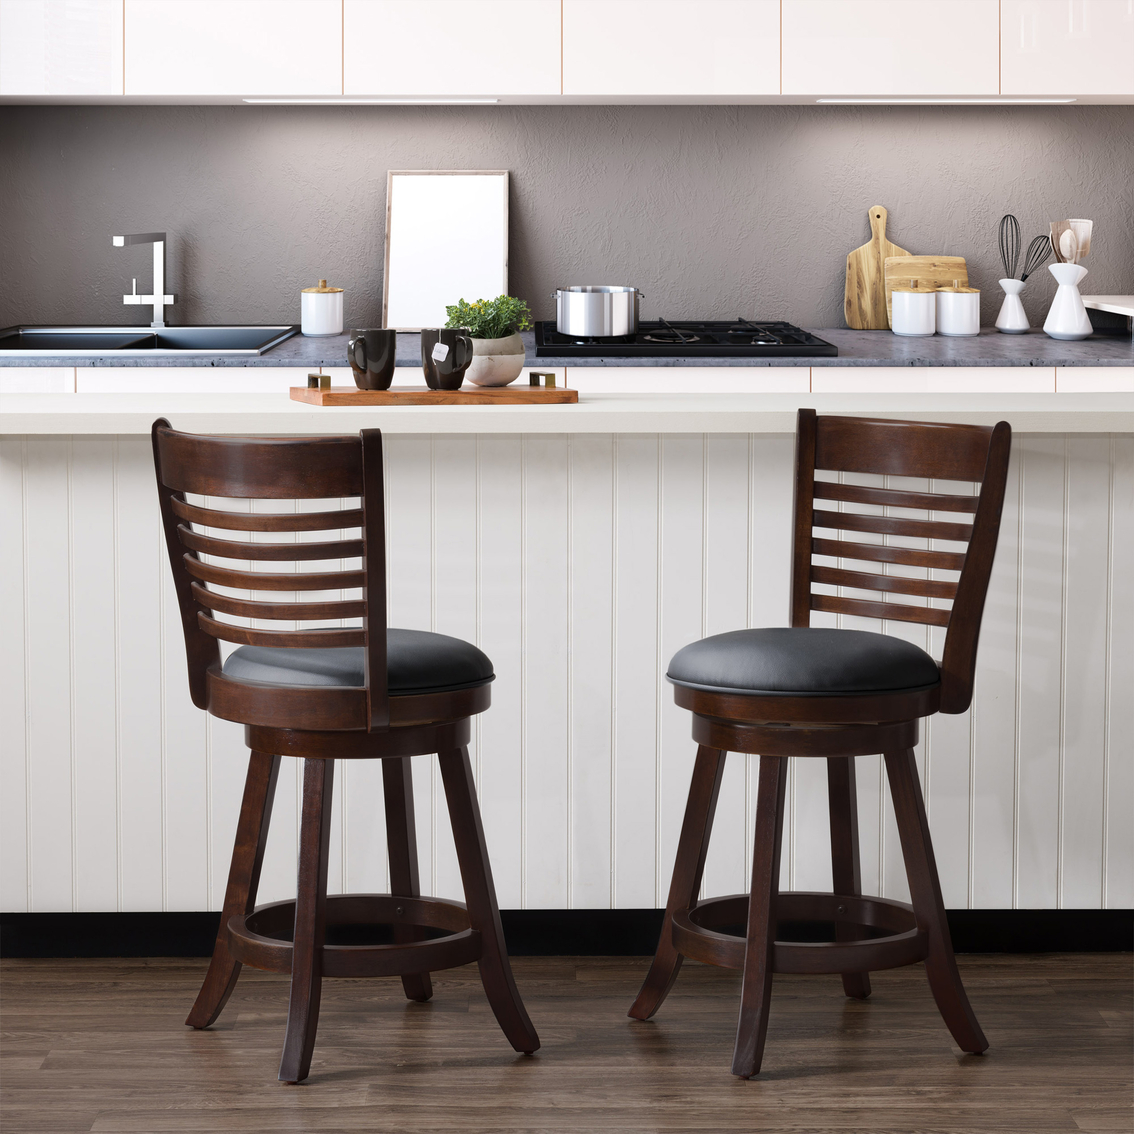 CorLiving Woodgrove Counter Height Bar Stools with Slat Backrests Set of 2 - Image 8 of 8